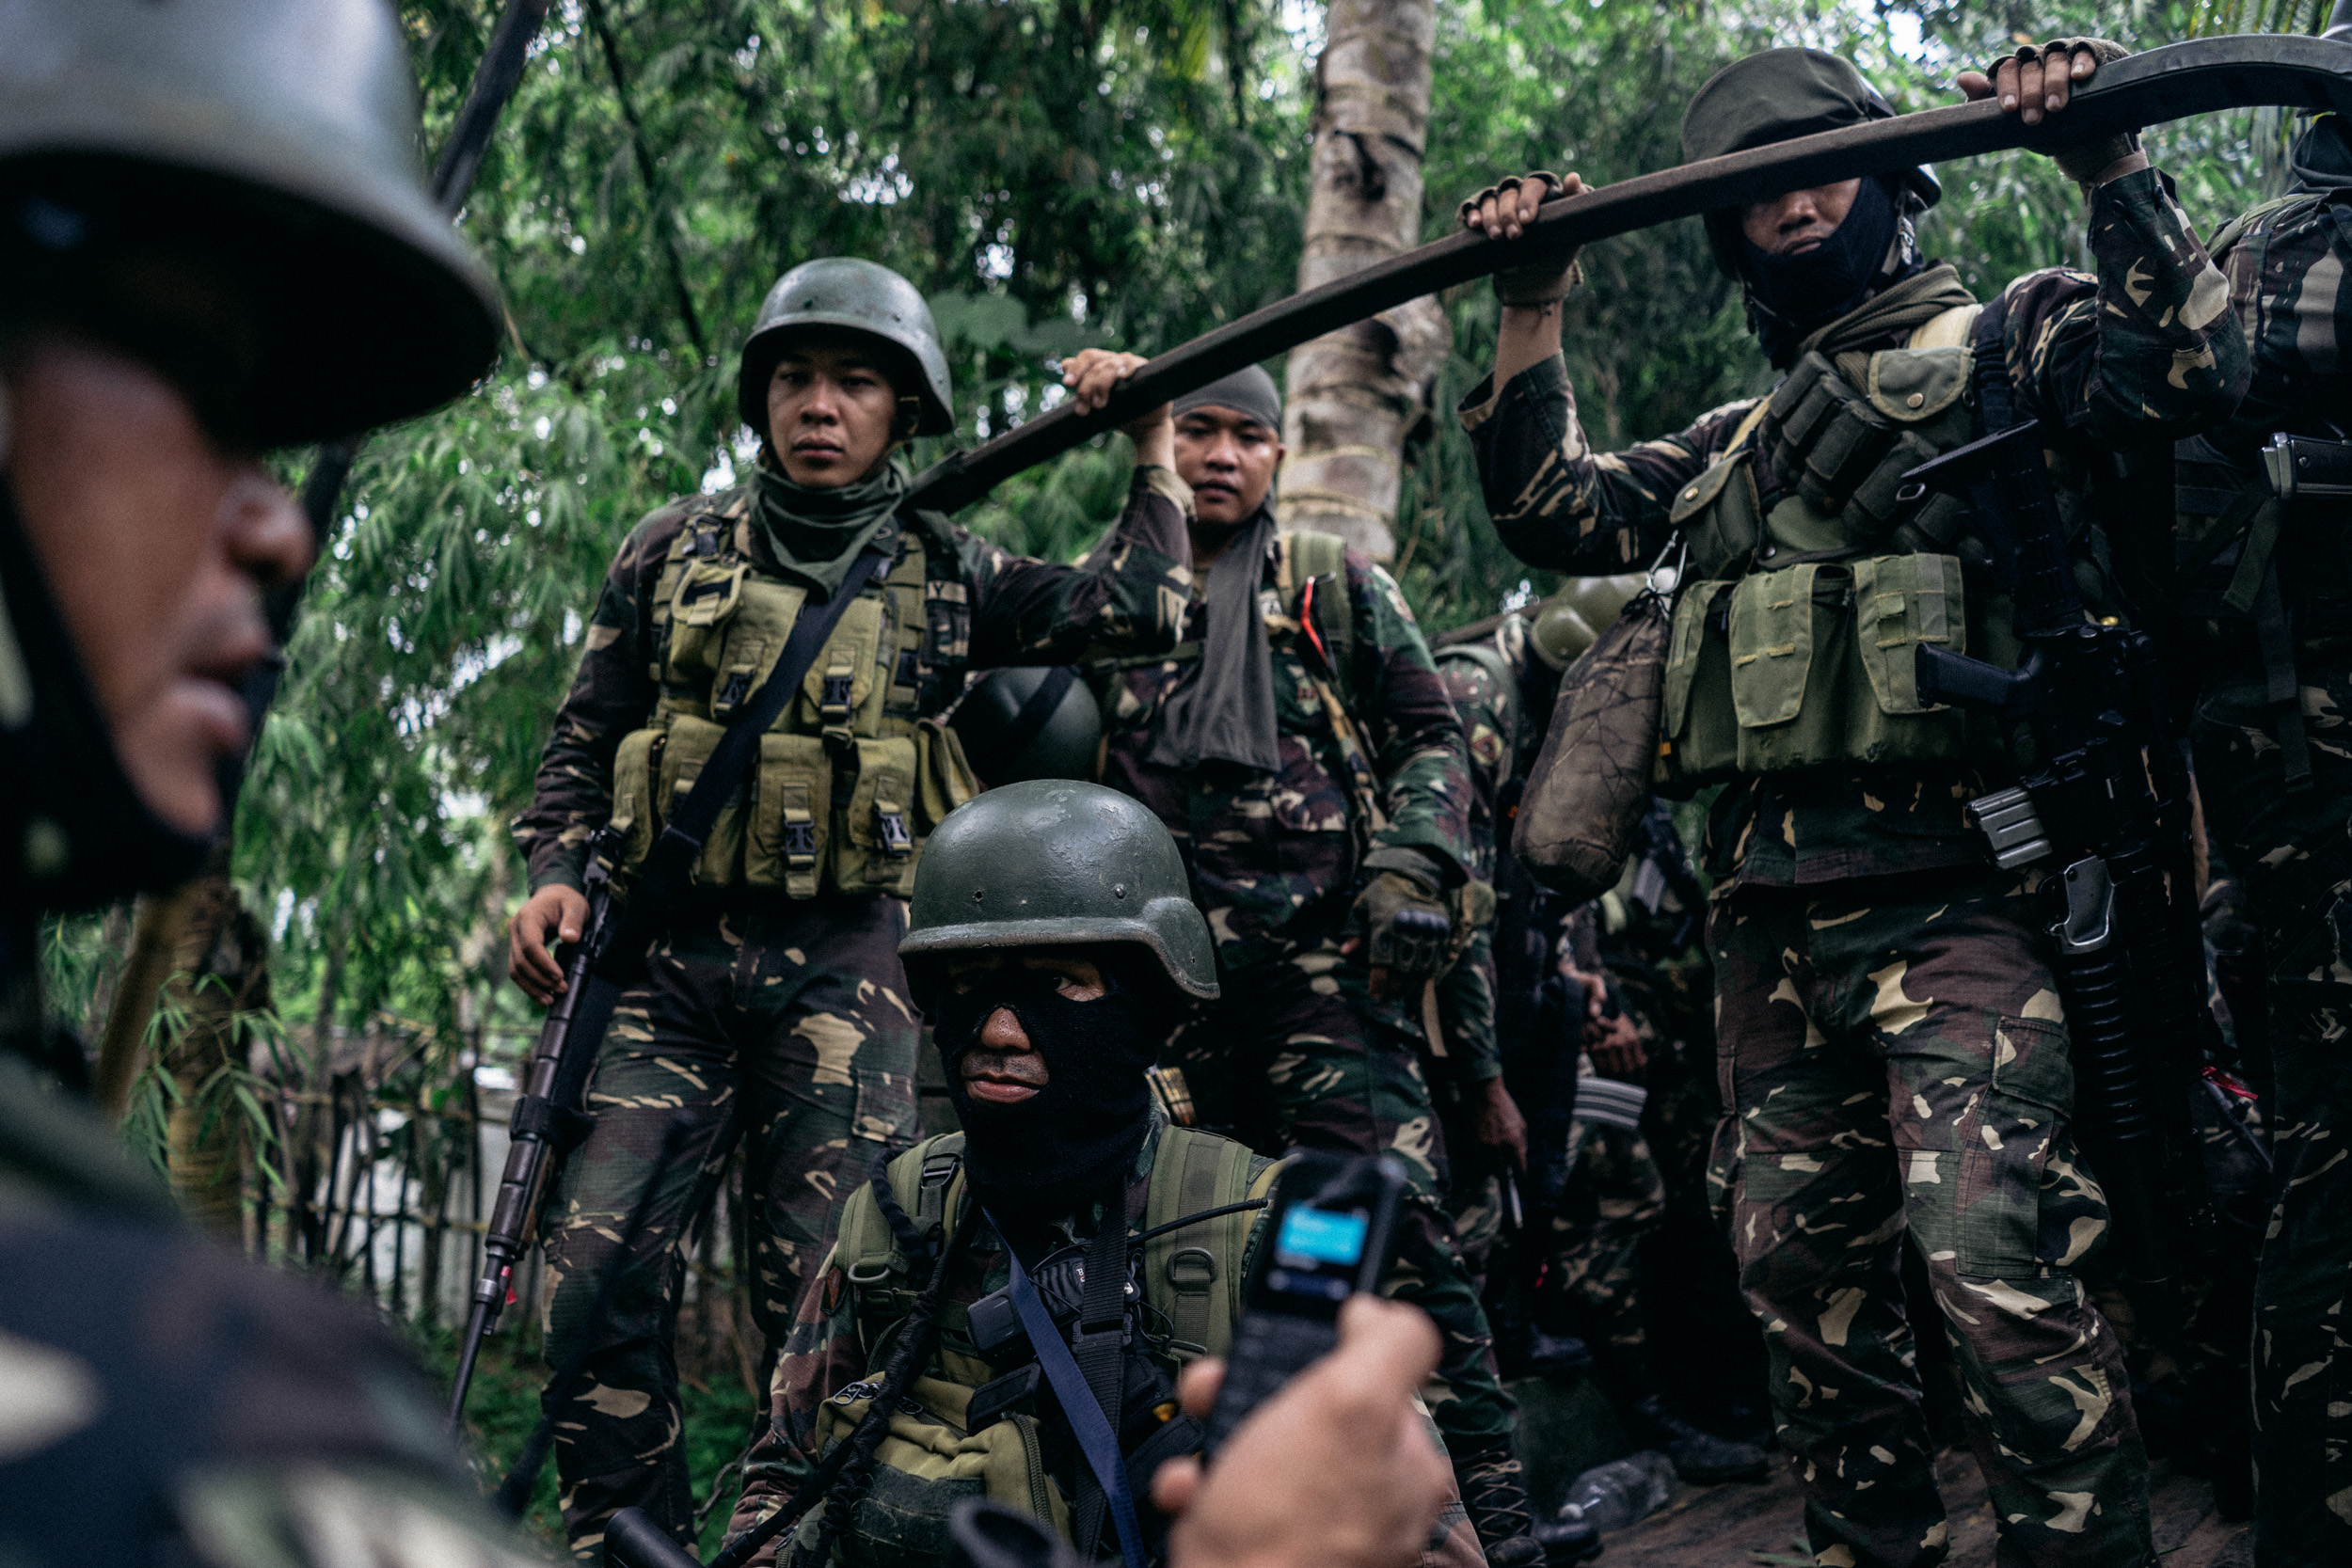  A soldier from the Armed Forces of the Philippines (AFP) is seen during an operation ambushing suspected drug lords affiliated with a terrorist group. The soldier is part of a battalion serving in Mindanao, South of the Philippines, and home to the 